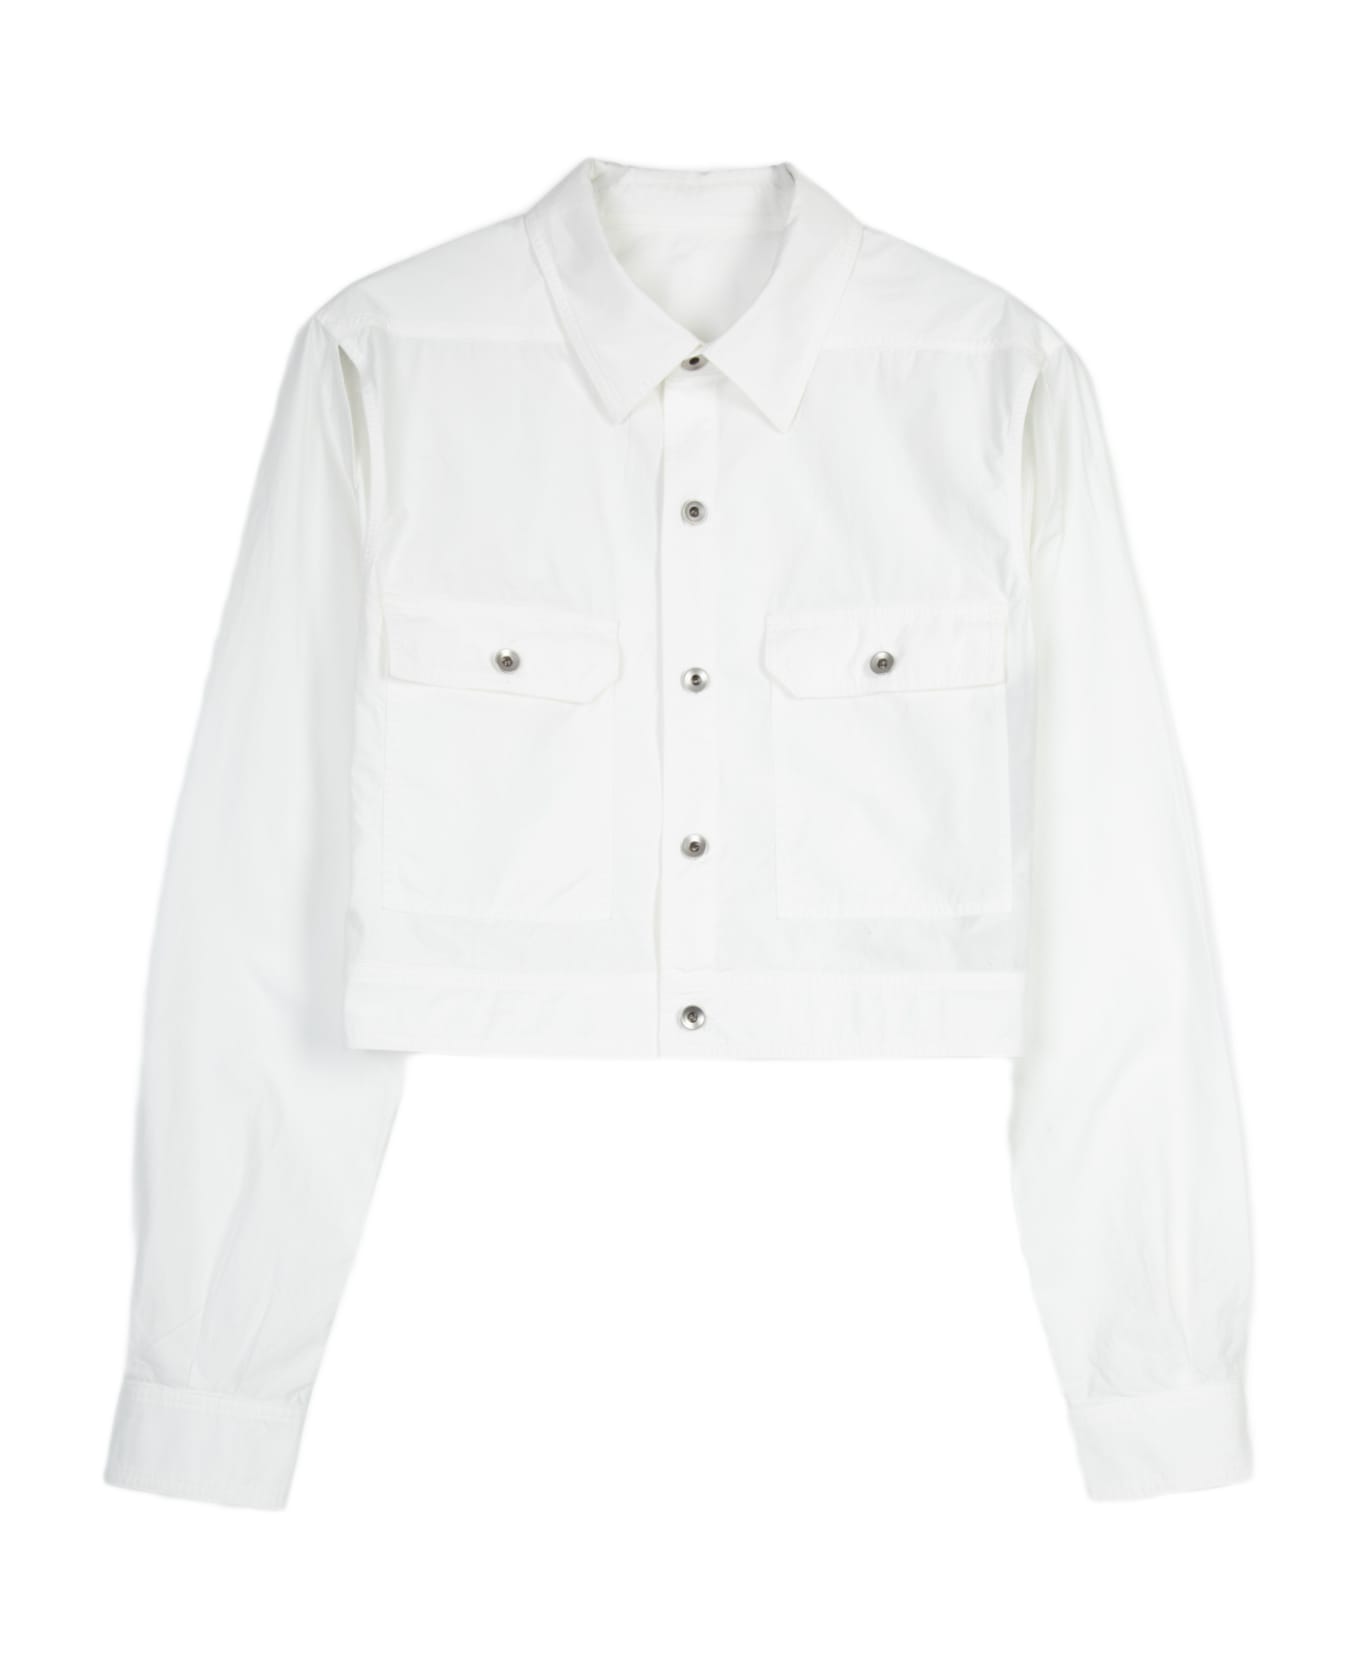 DRKSHDW Cape Sleeve Cropped Outershirt White Poplin Cotton Outershirt - Cape Sleeve Cropped Outershirt - White